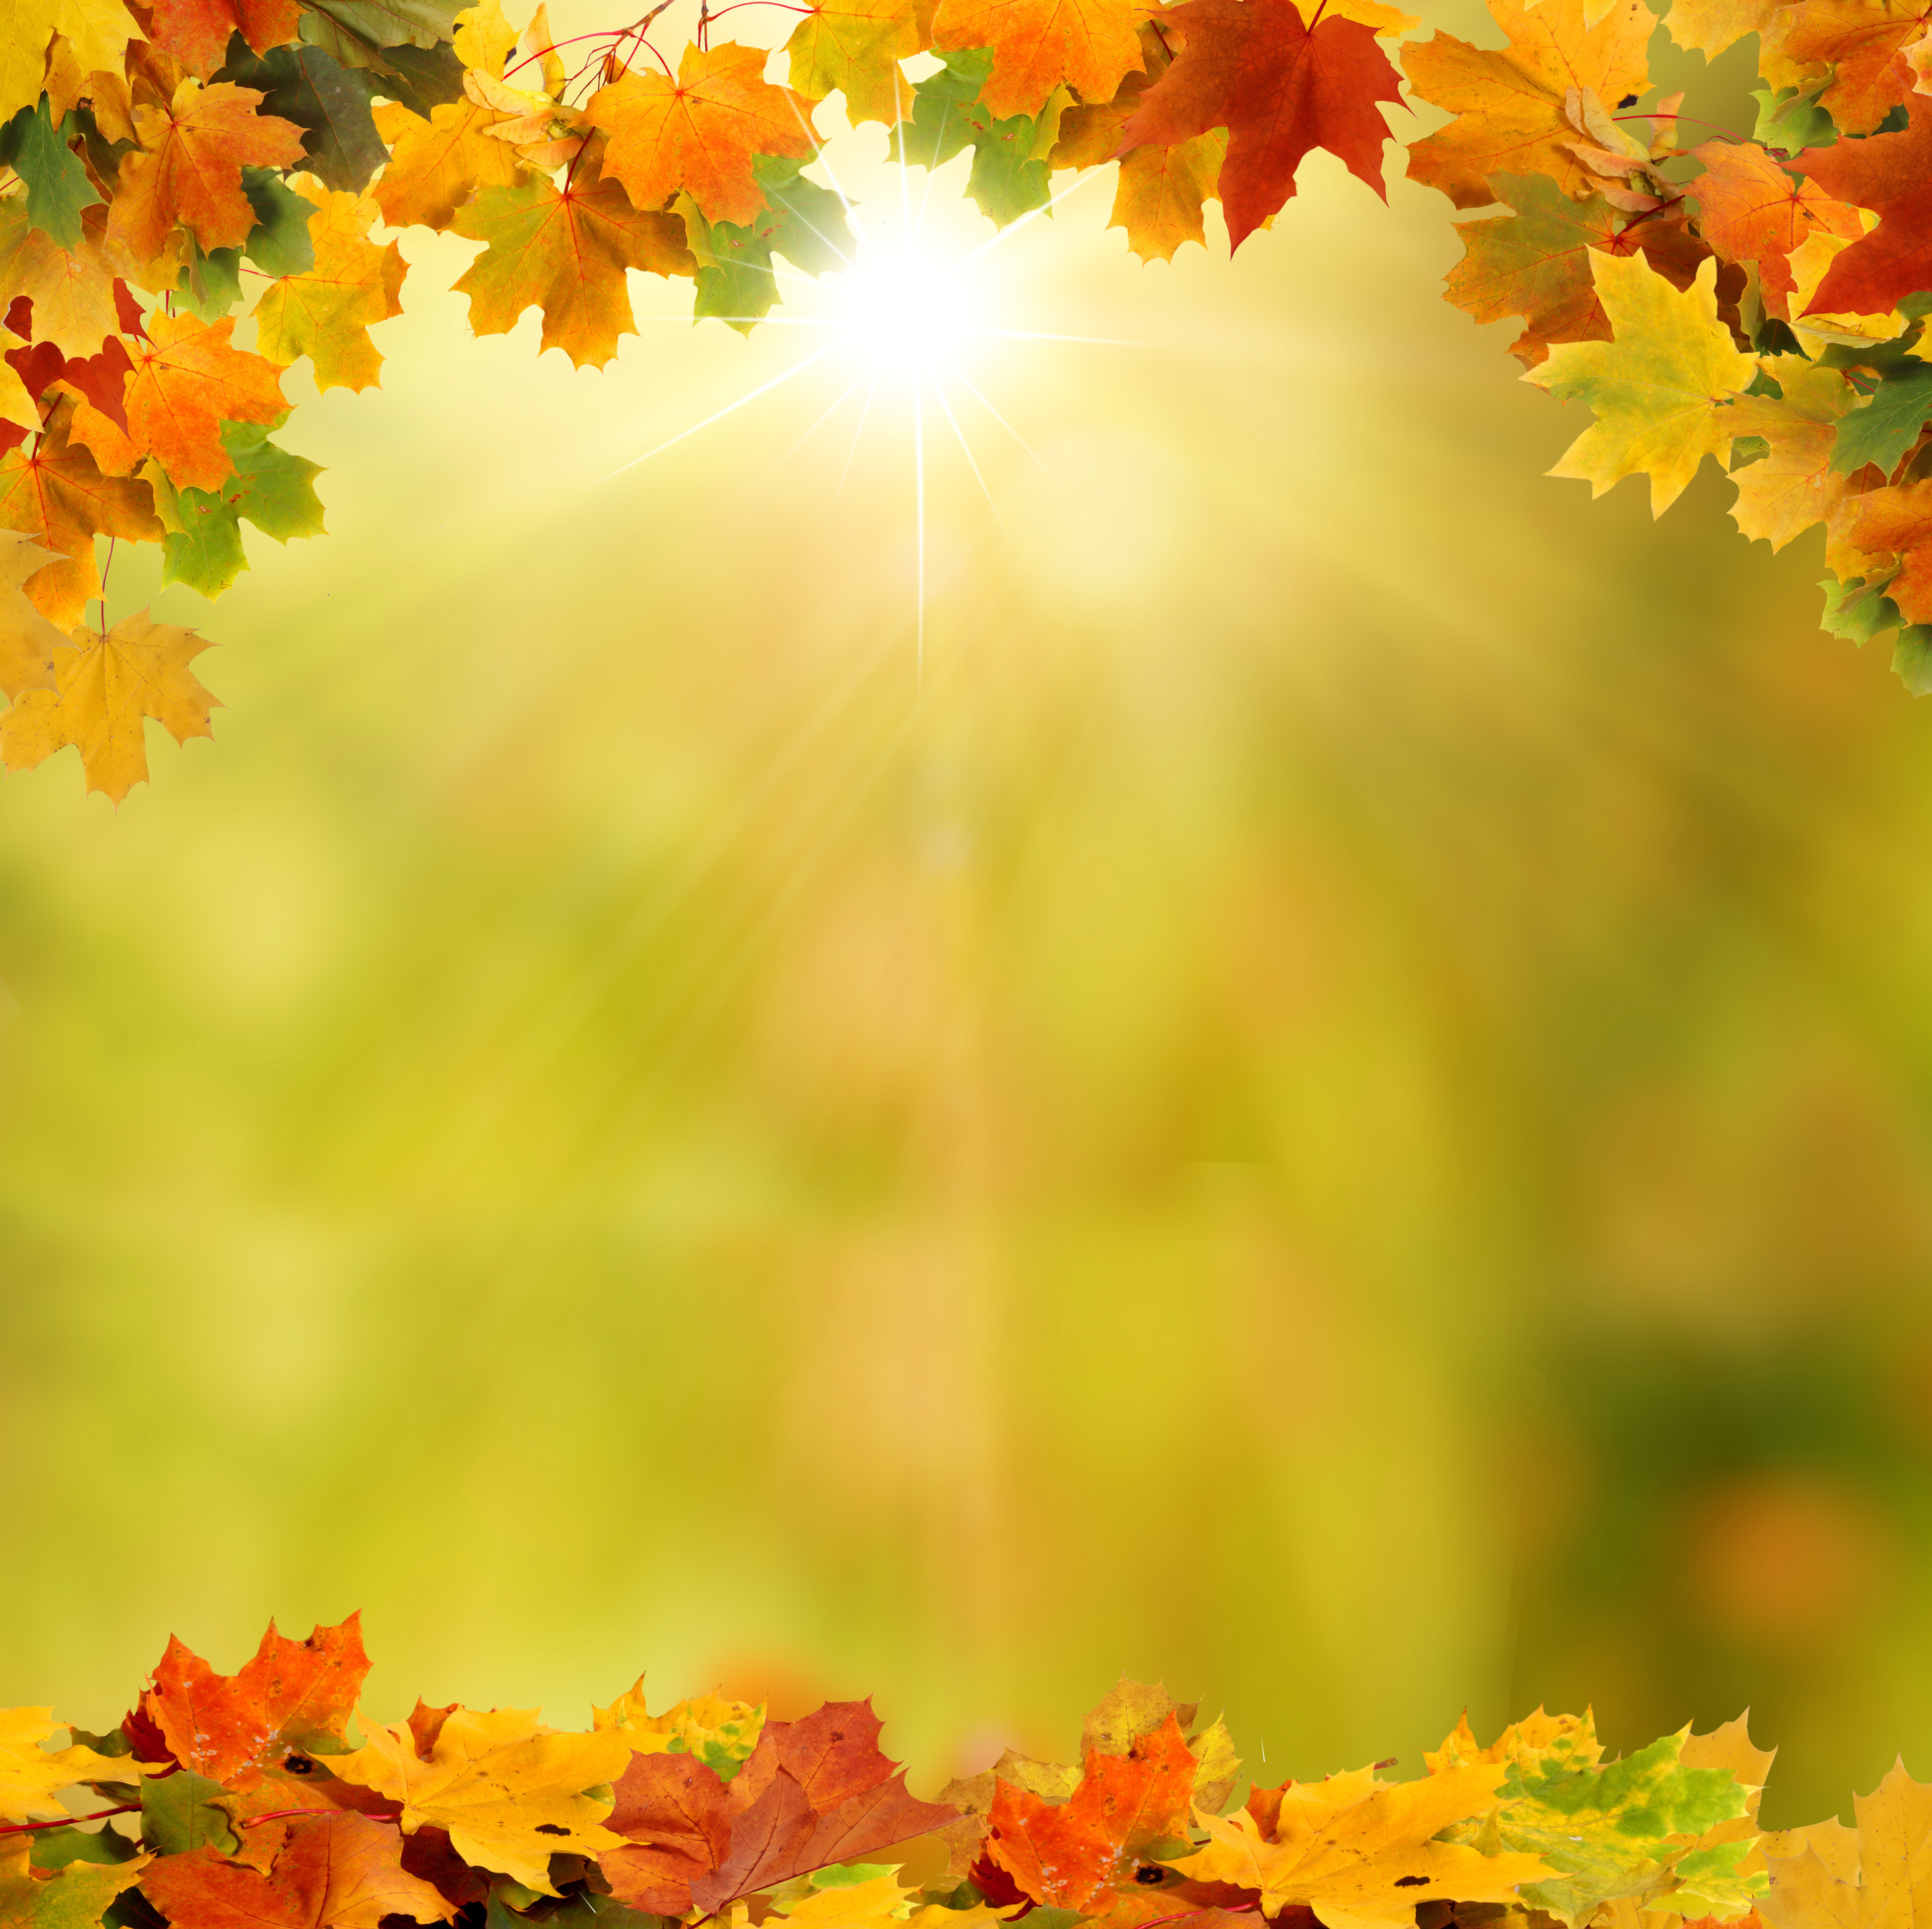 Background With Autumn Leaves Art